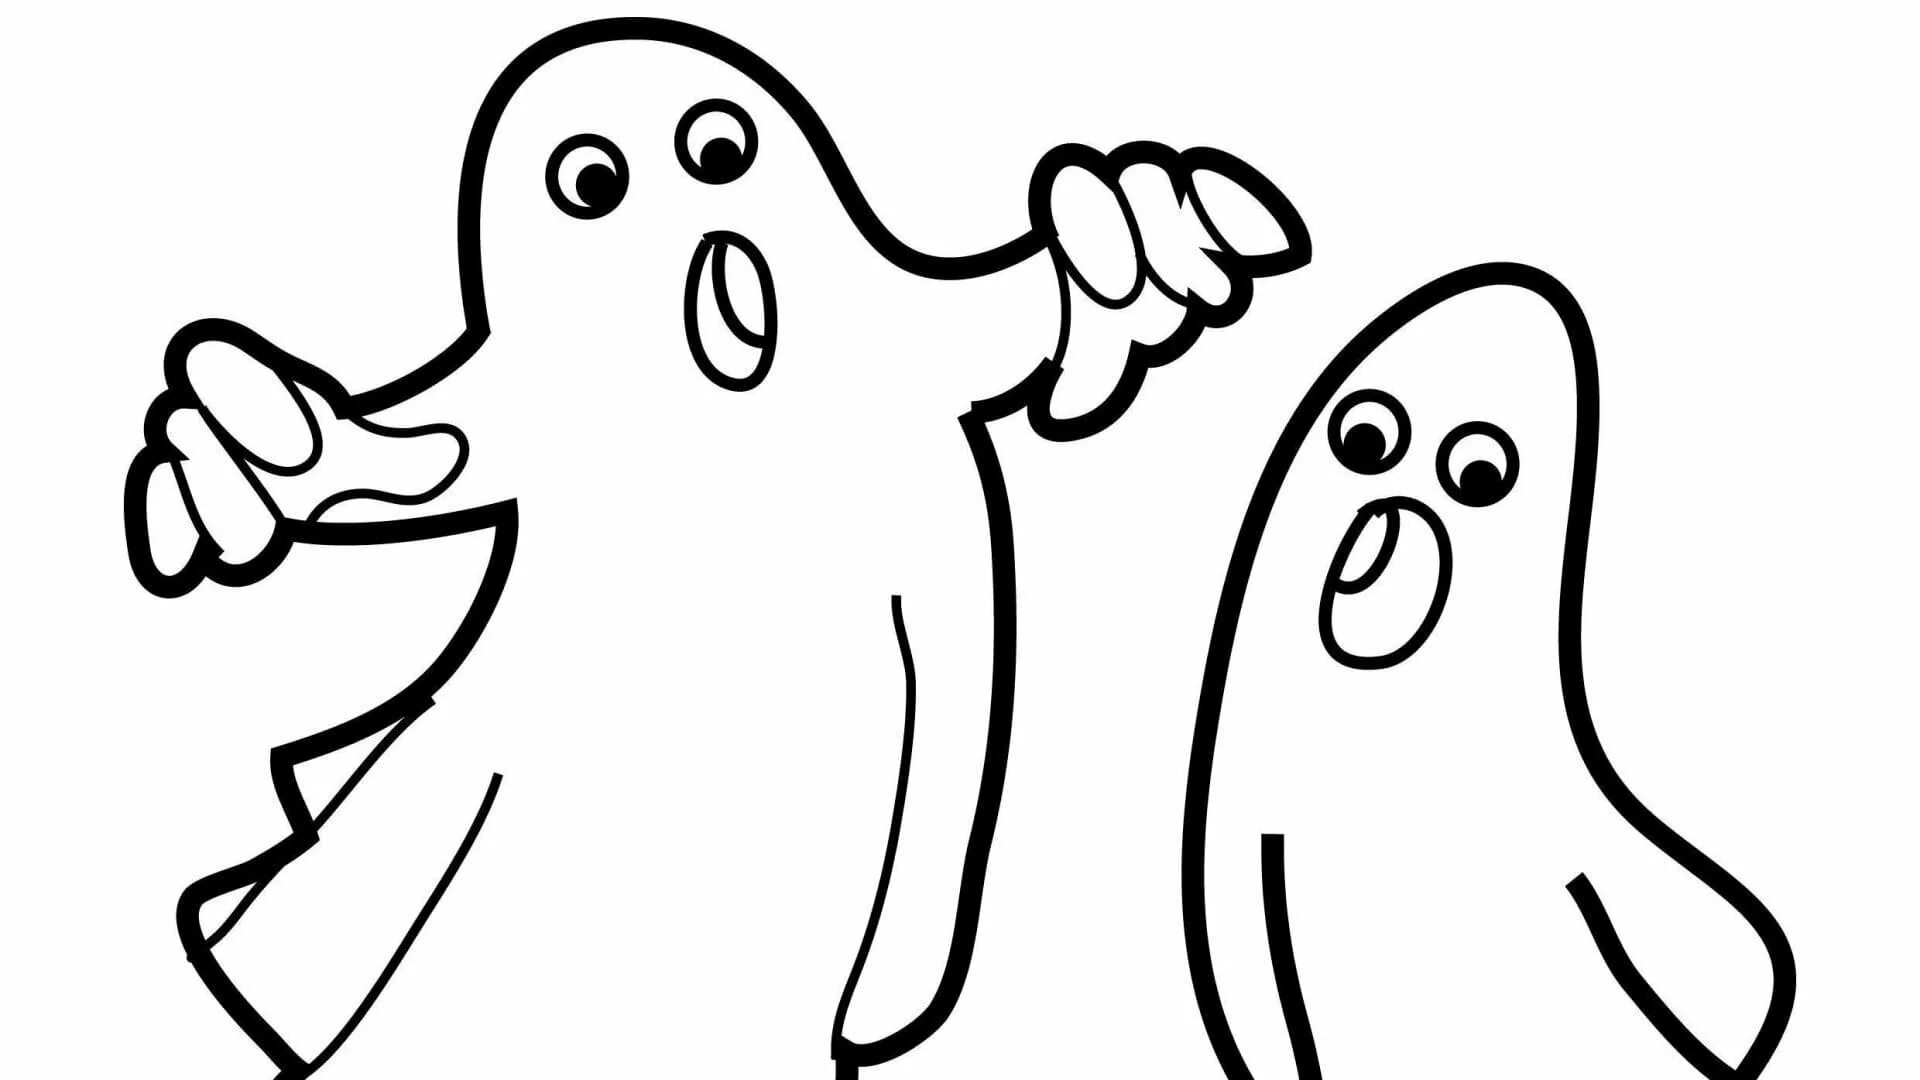 Ghost for kids #4